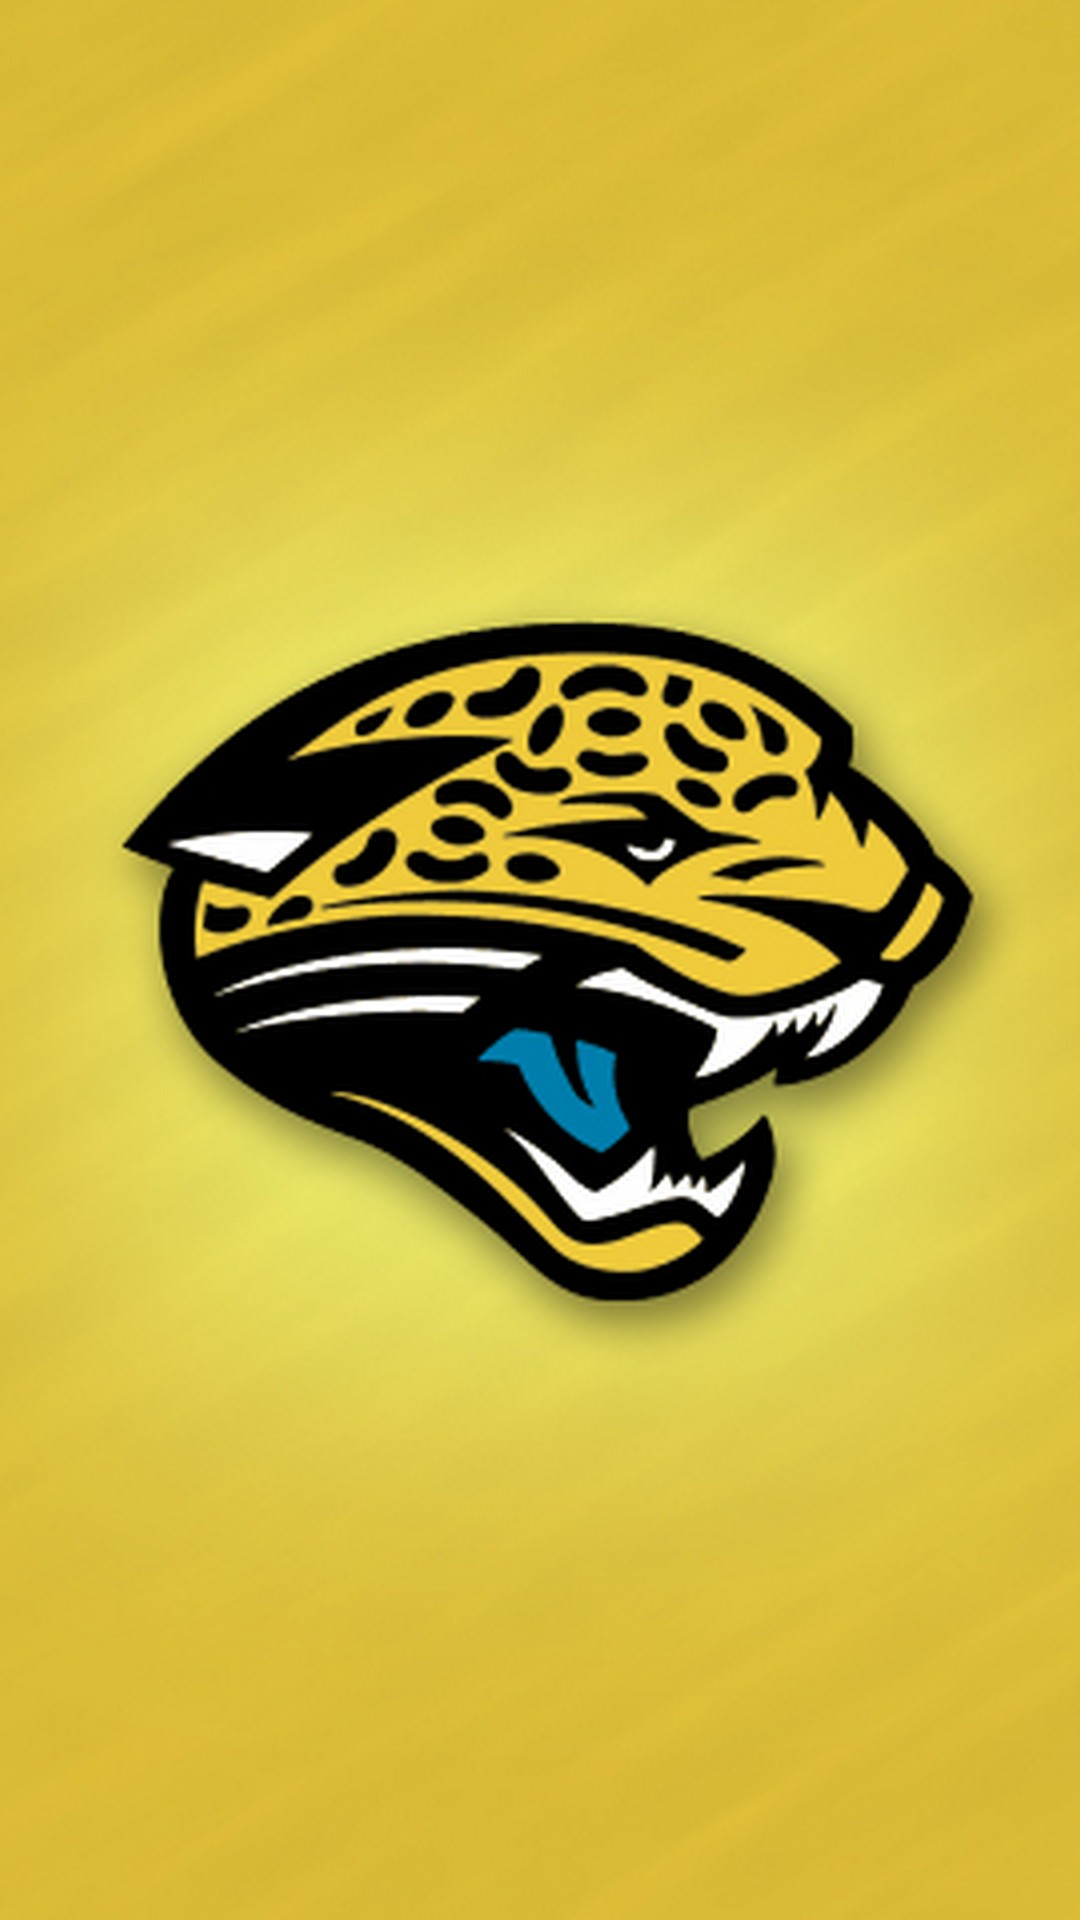 Jacksonville Jaguars iPhone 7 Plus Wallpaper With high-resolution 1080X1920 pixel. You can use this wallpaper for your Mac or Windows Desktop Background, iPhone, Android or Tablet and another Smartphone device